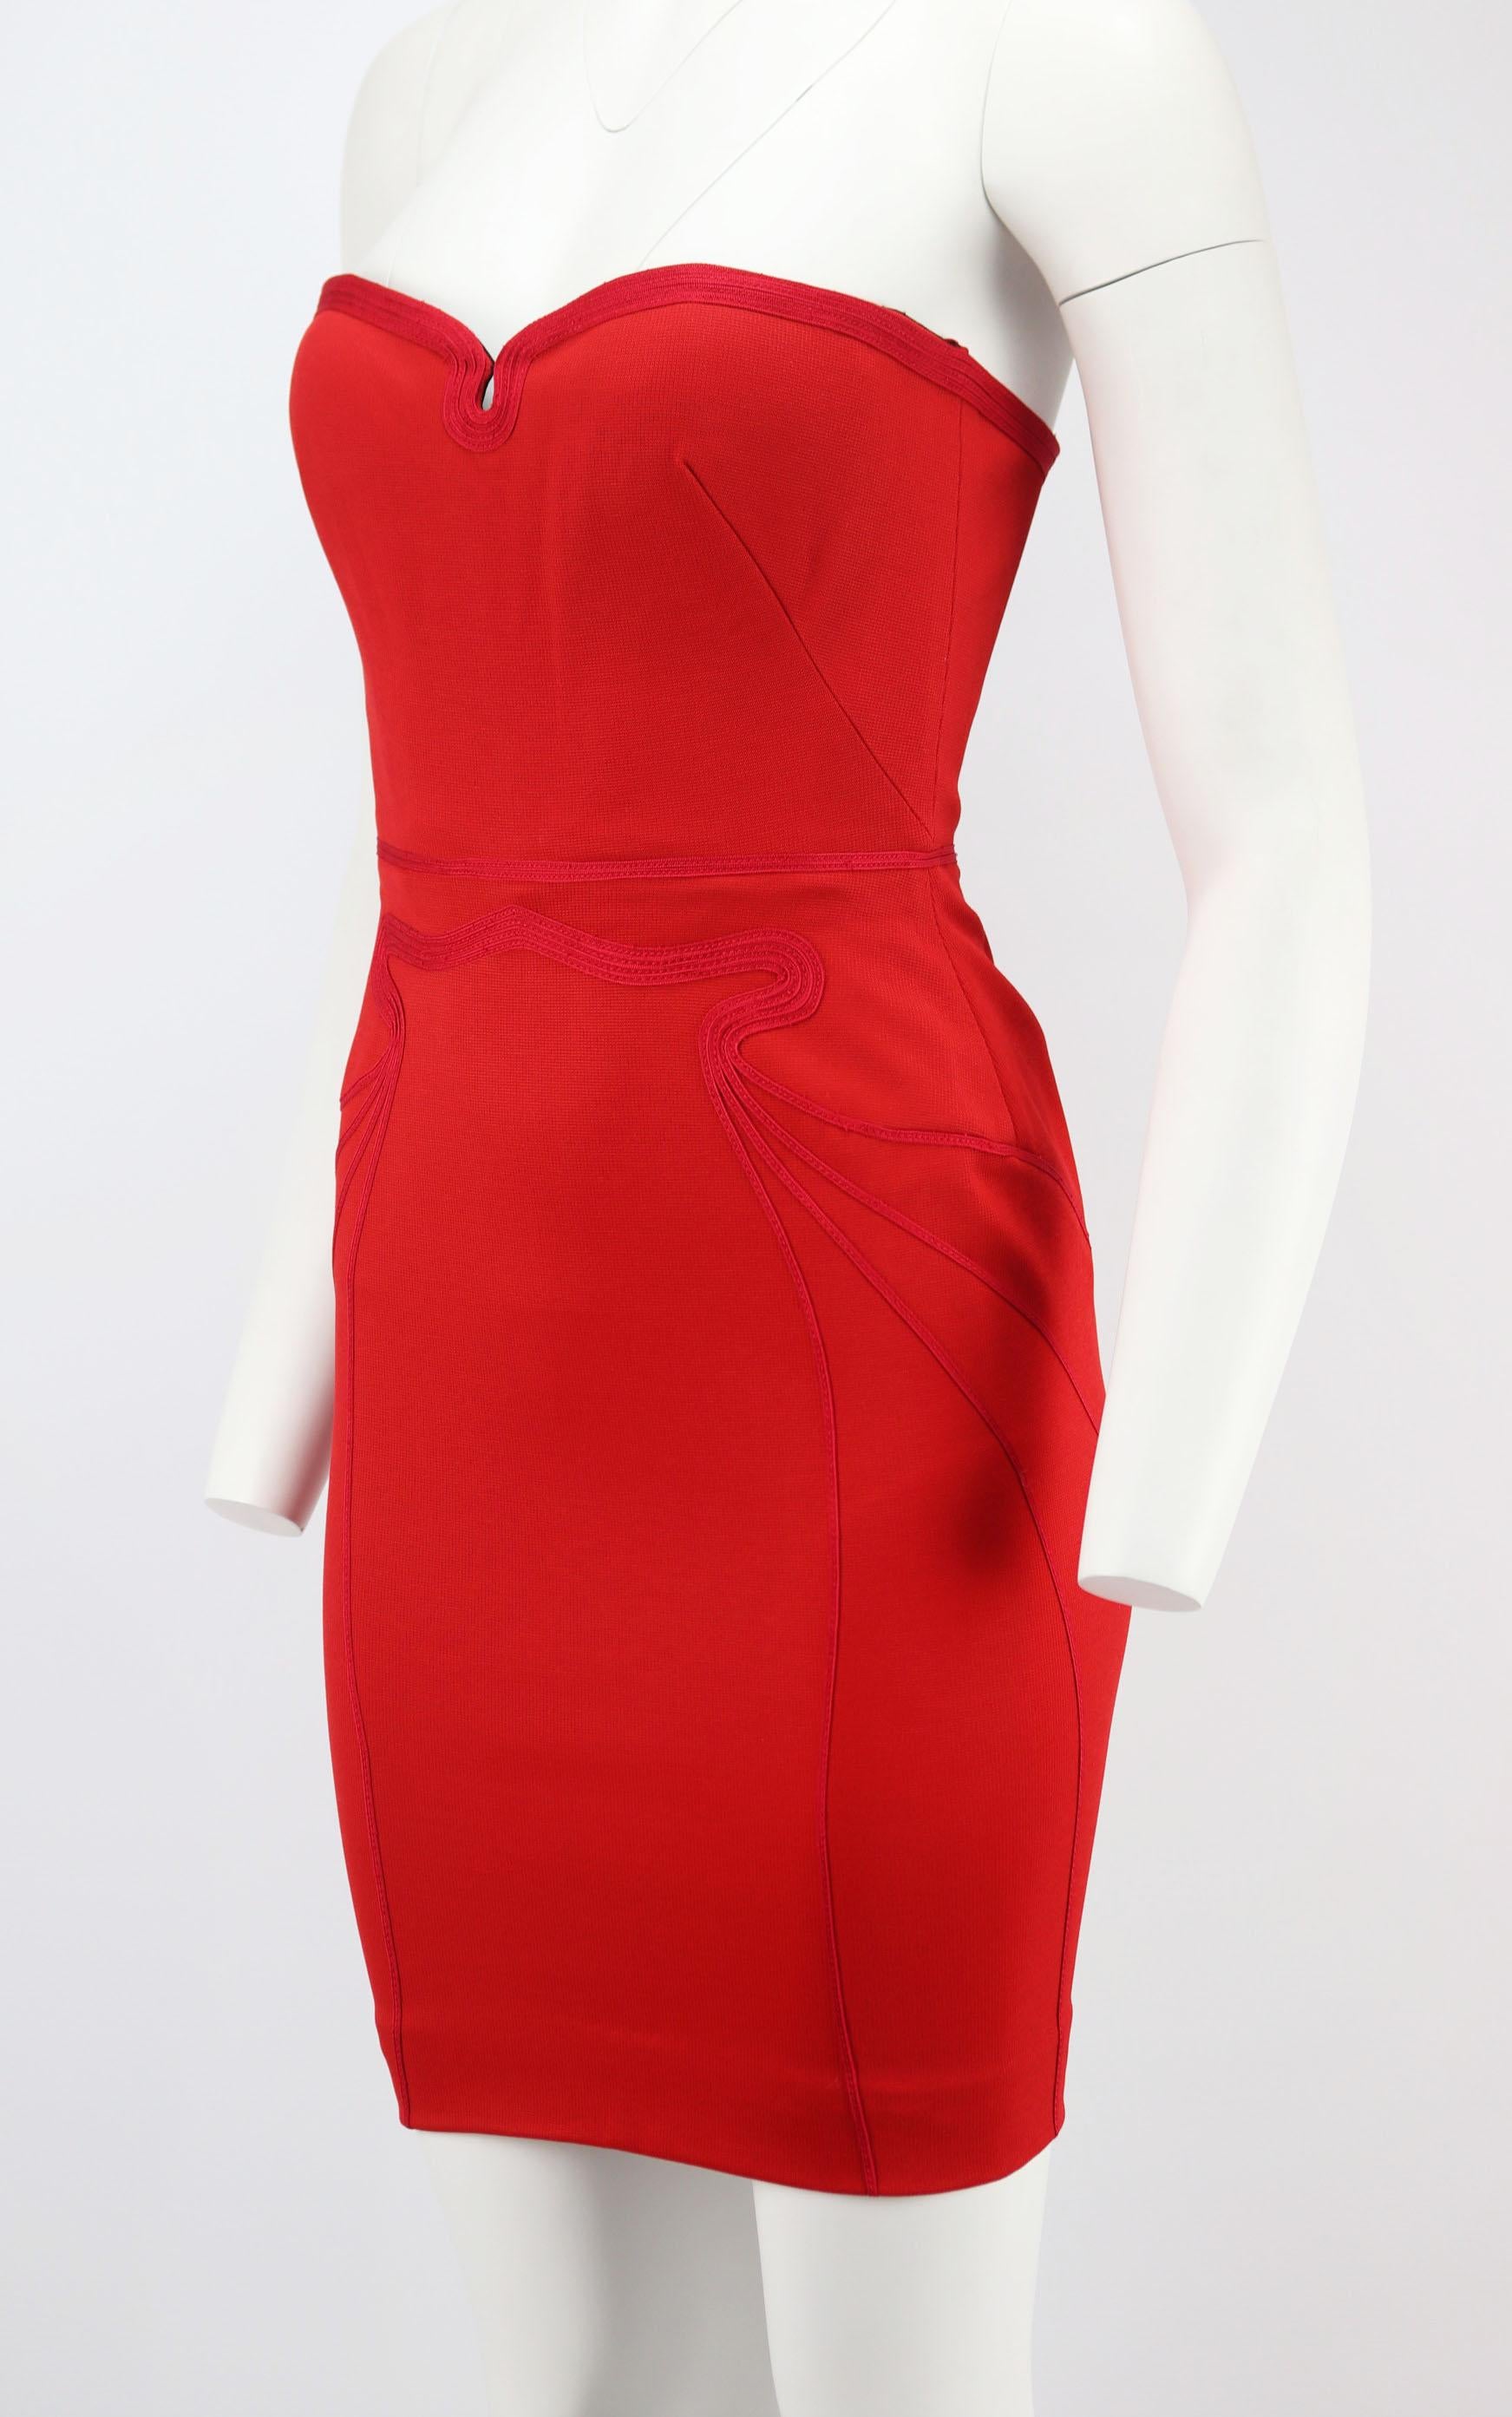 Every woman should have a classic red dress in her evening portfolio, and Zac Posen's style is a striking choice, cut from panelled stretch-woven into a ladylike silhouette with strapless boned bodice, this piece will give you a flawless cocktail